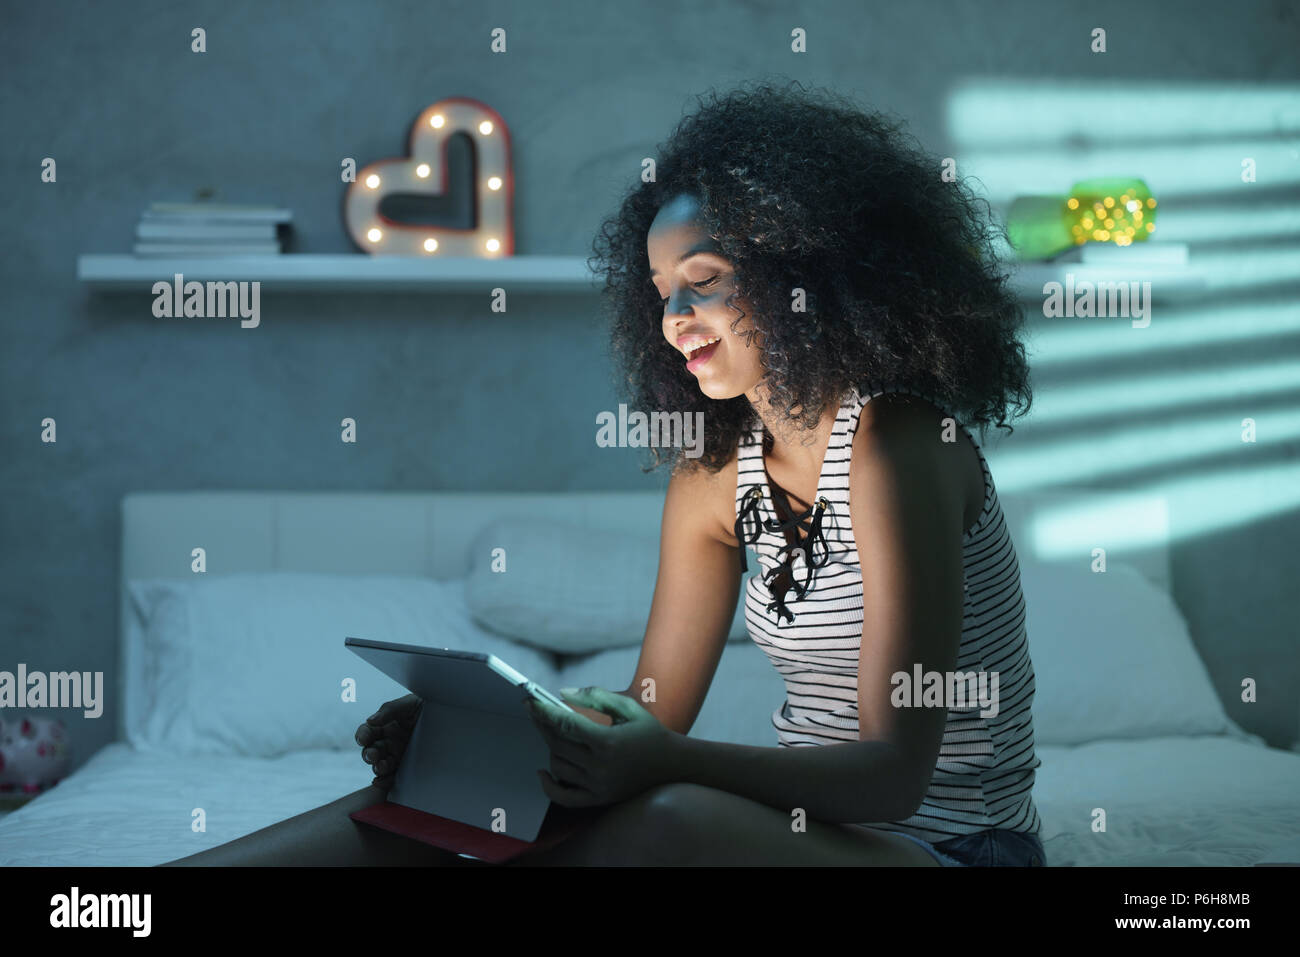 Young Black Woman Watching Movie With Laptop At Night Stock Photo